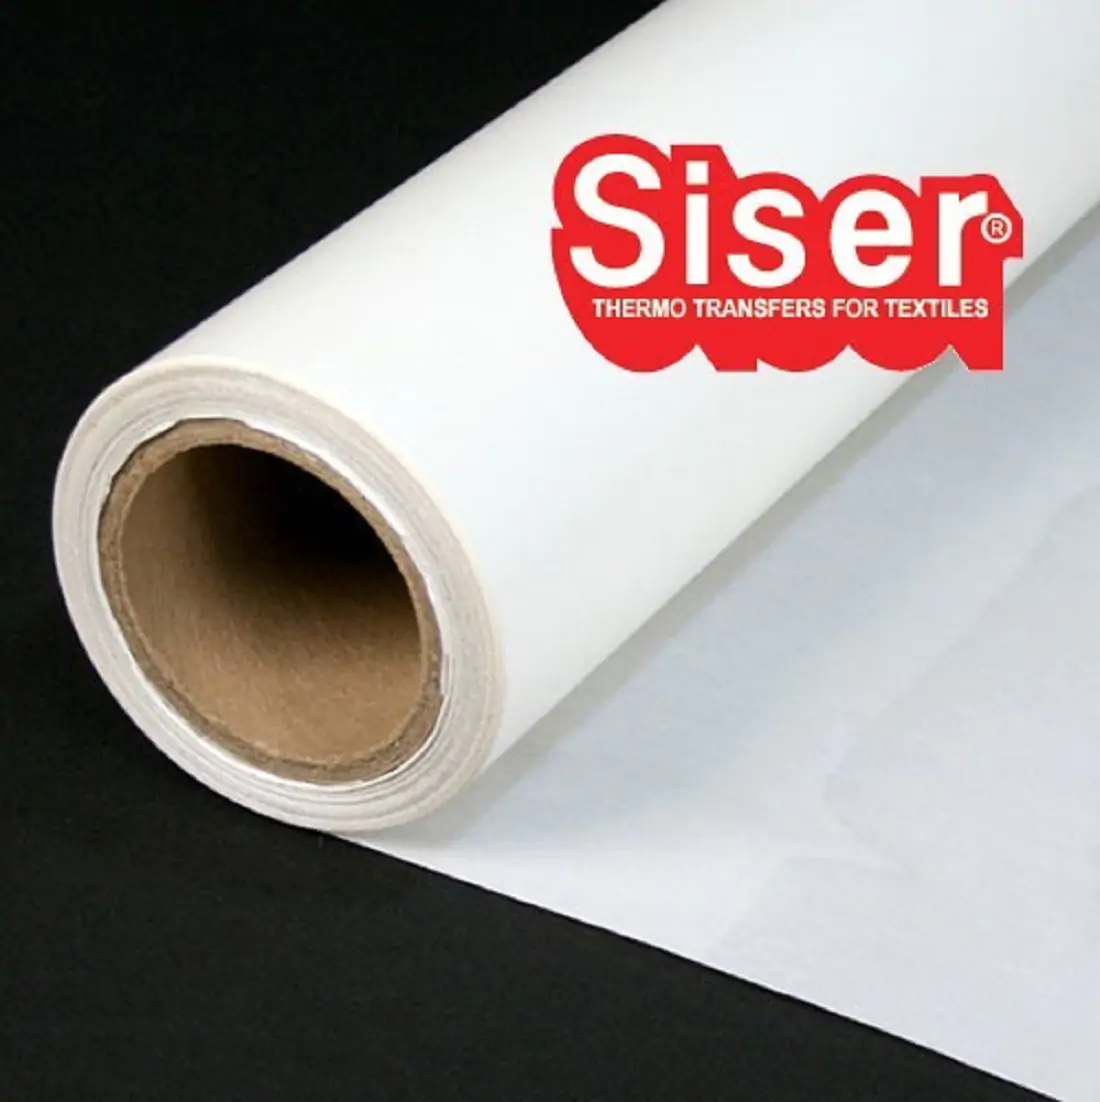 White roll of Siser TTD High Tack Heat Transfer Mask with red and white Siser logo on a black background.